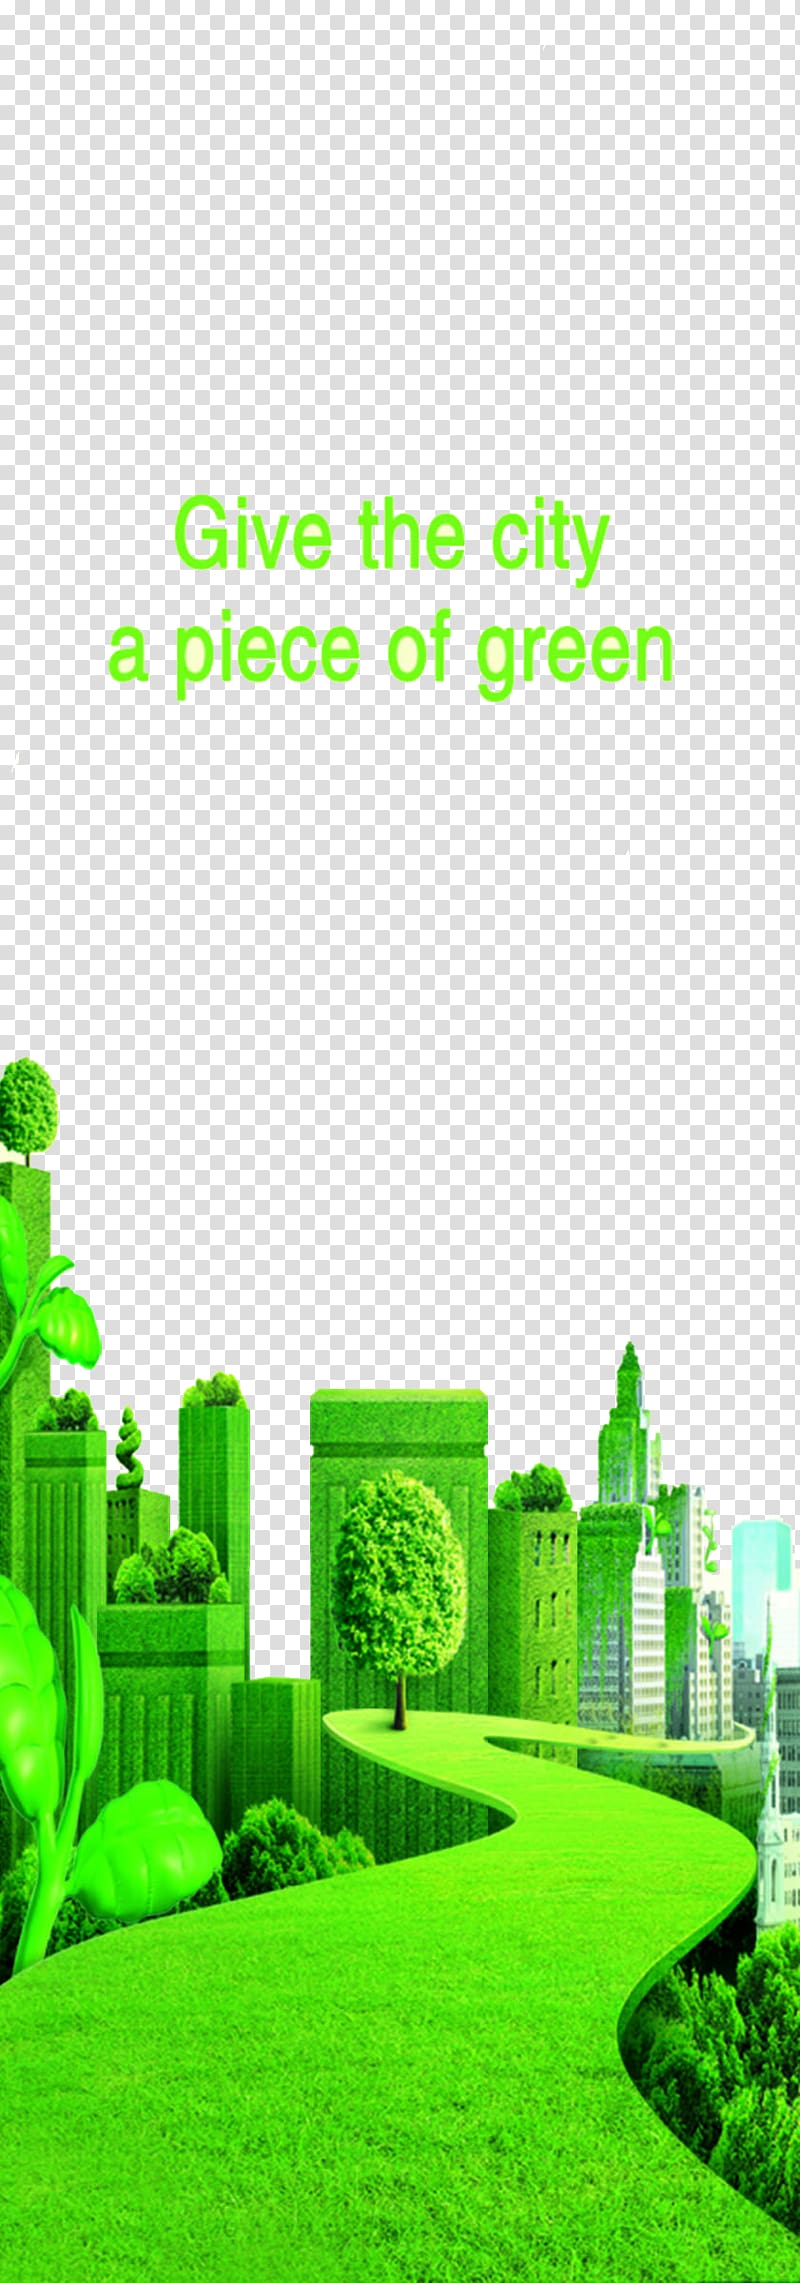 Green City, Give the city a green environment material transparent background PNG clipart